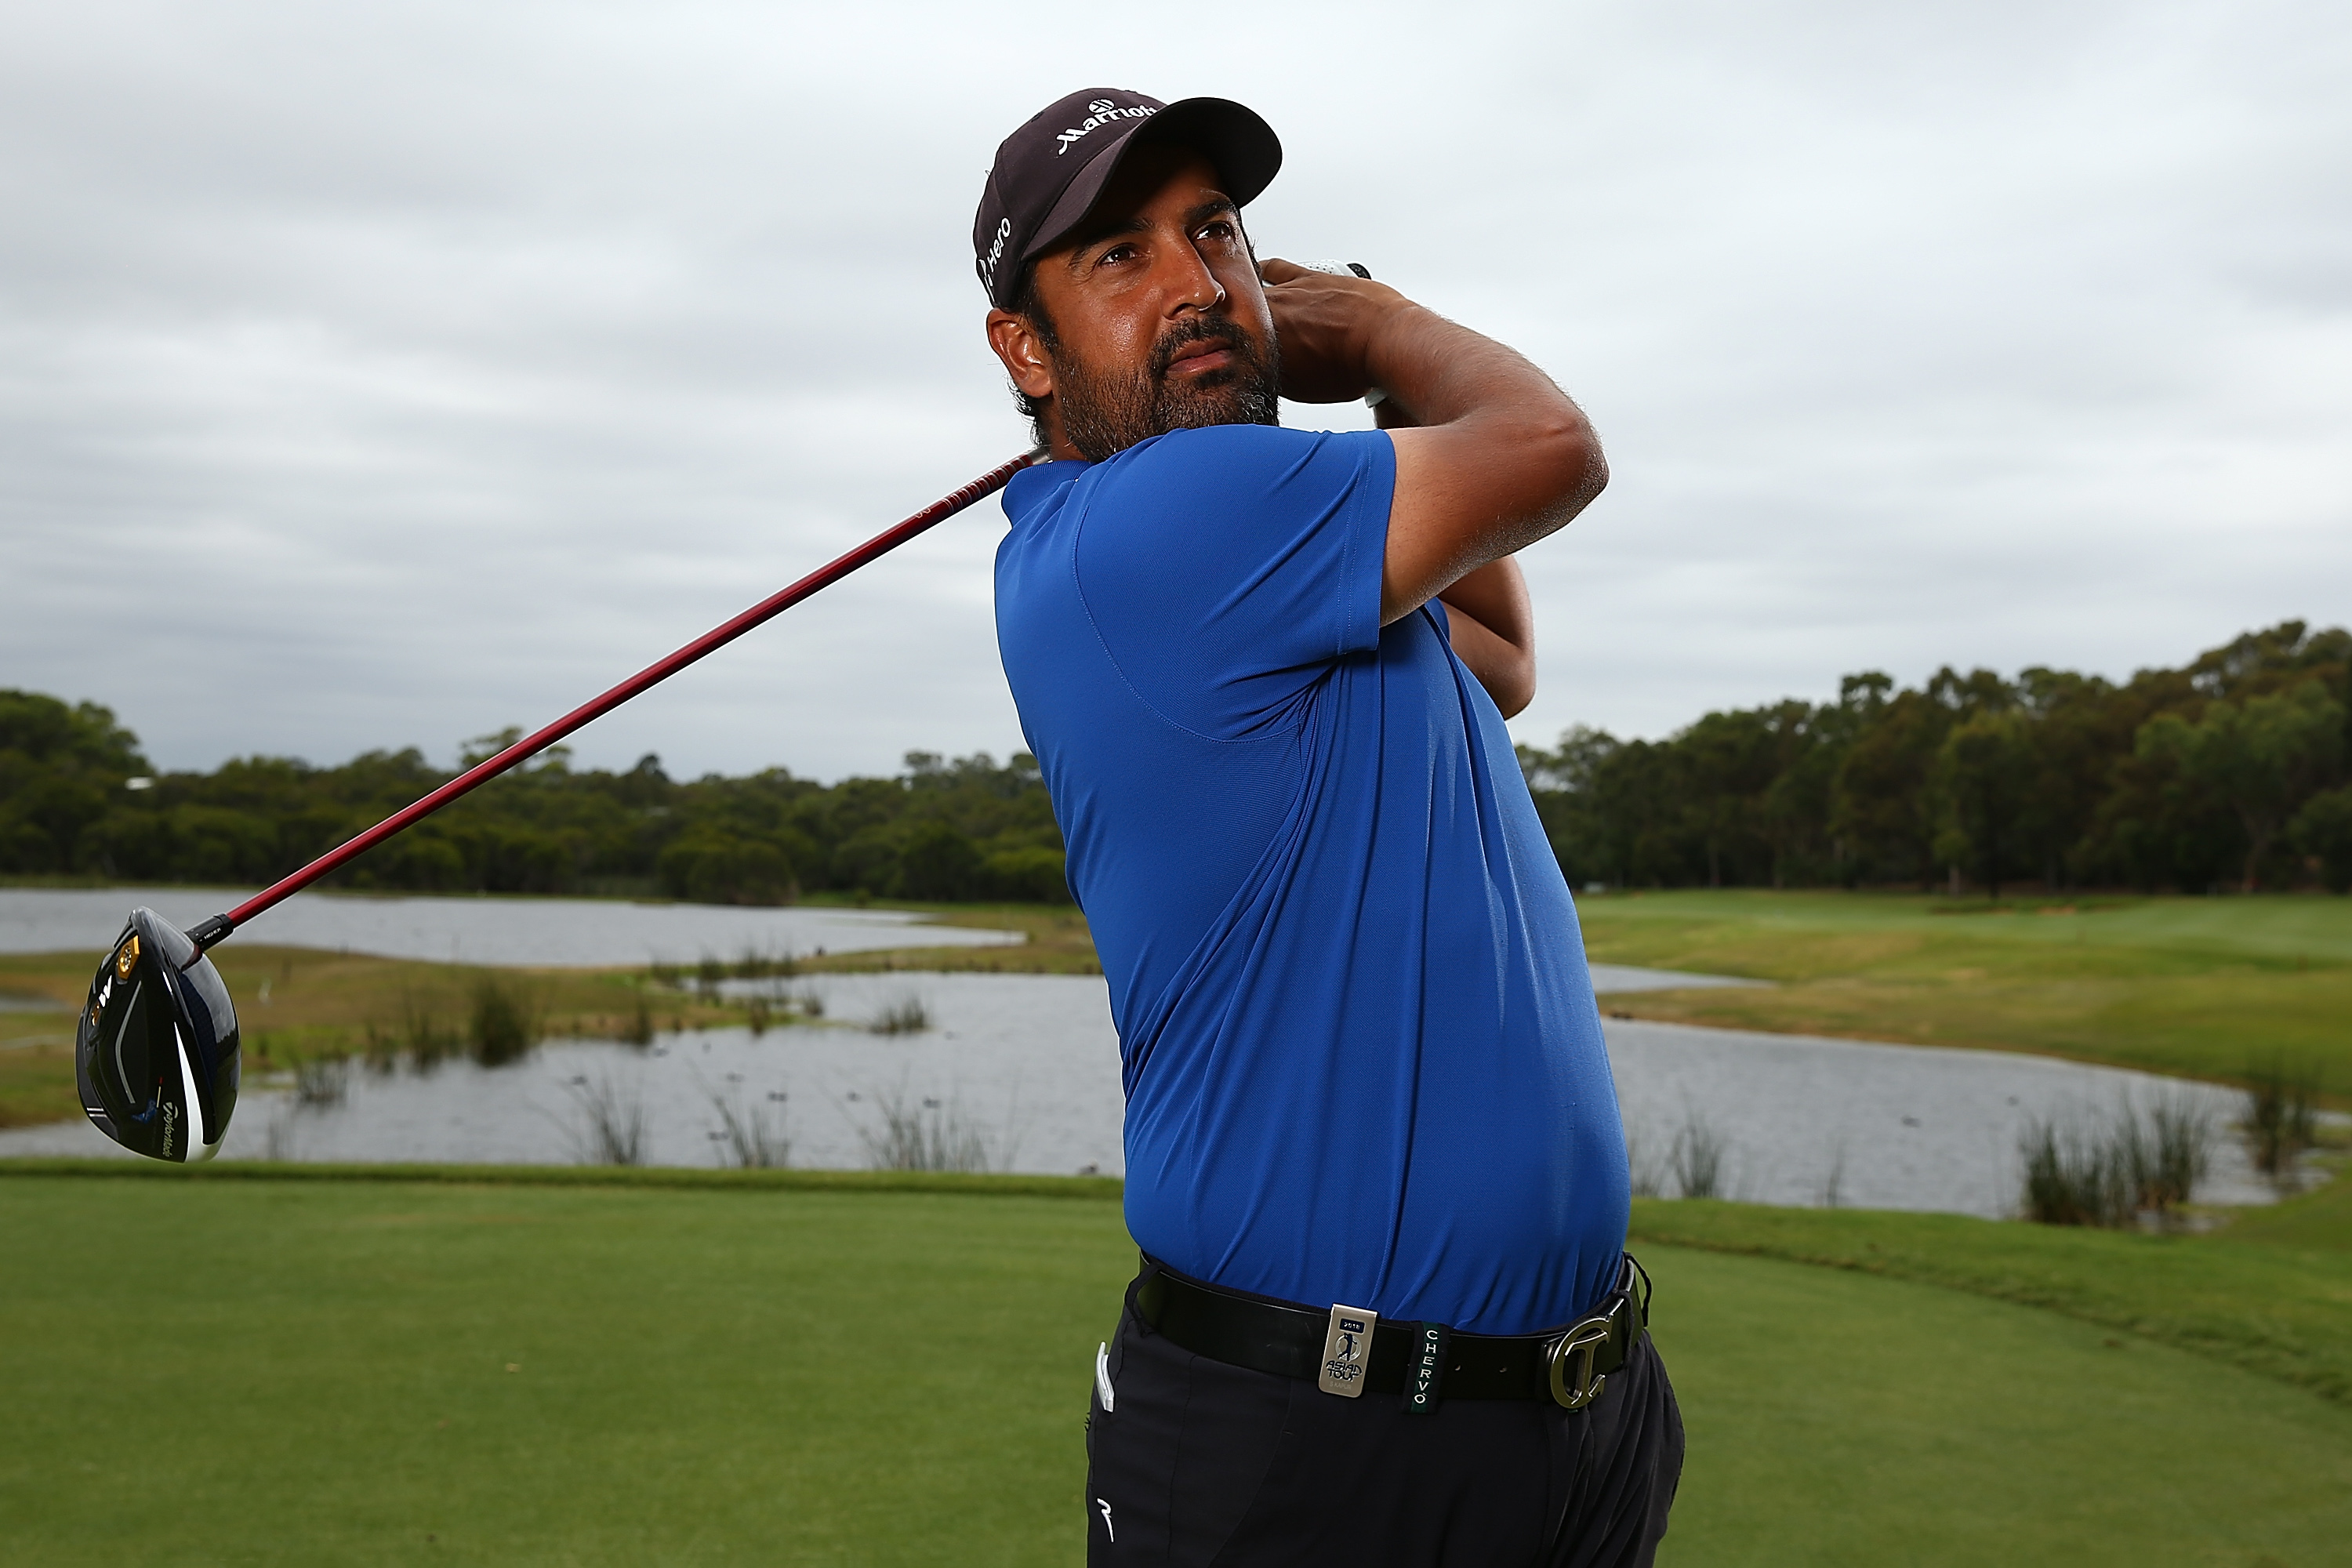 Royal Cup Golf Tournament | Shiv Kapur acquires tied second; Gaganjeet Bhullar finishes 10th